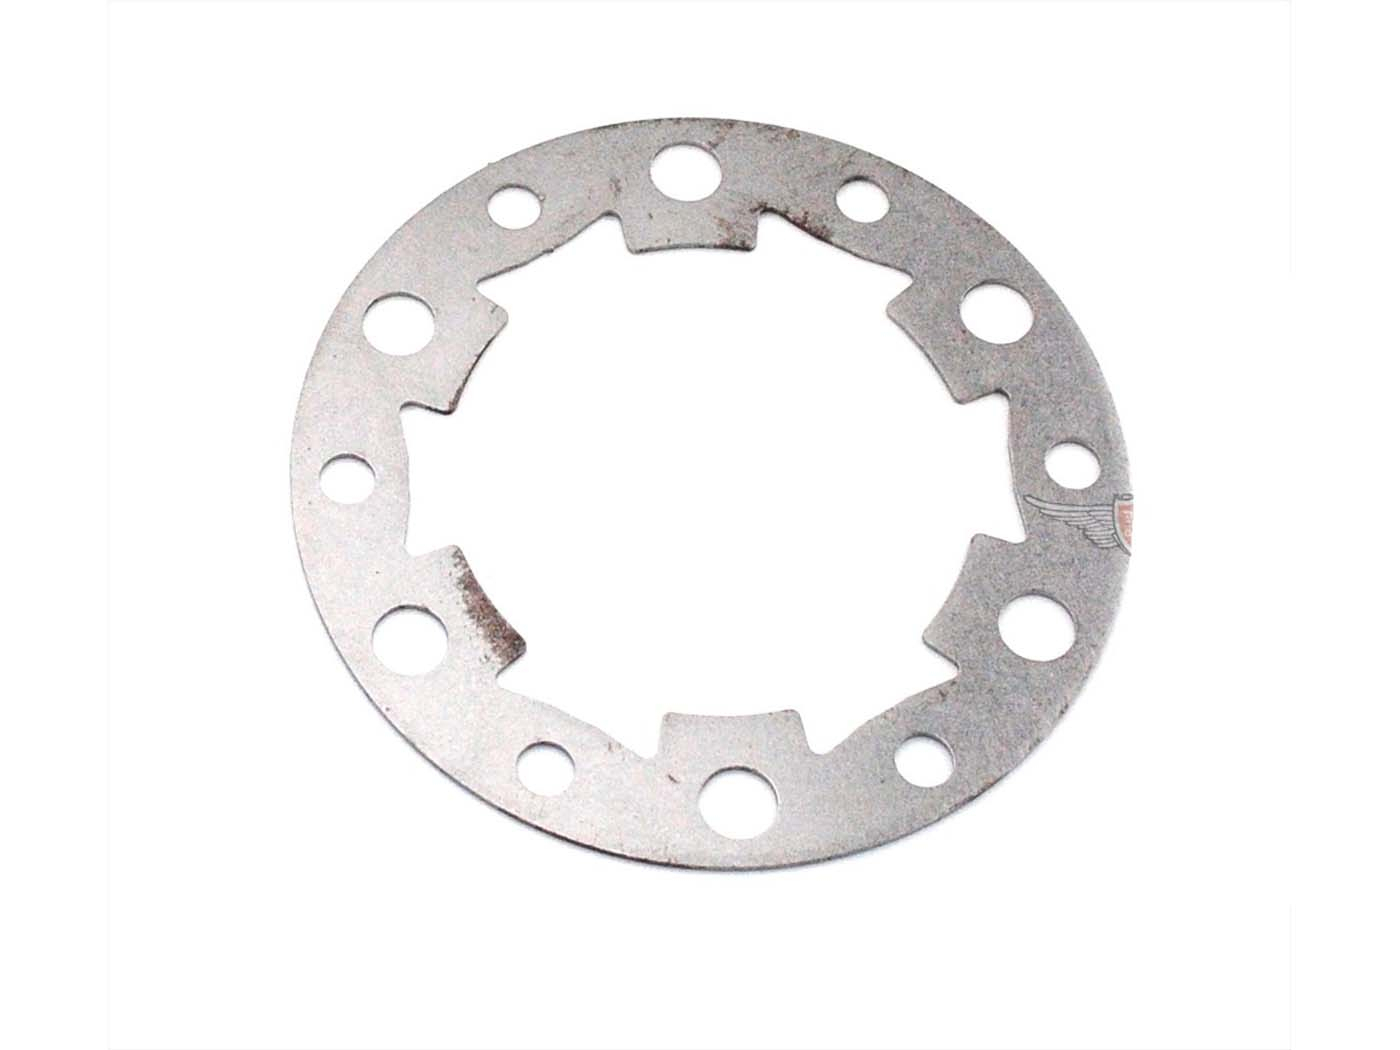 Clutch Sport Perforated Steel Disk For Kreidler Florett RS RMC LF Flory